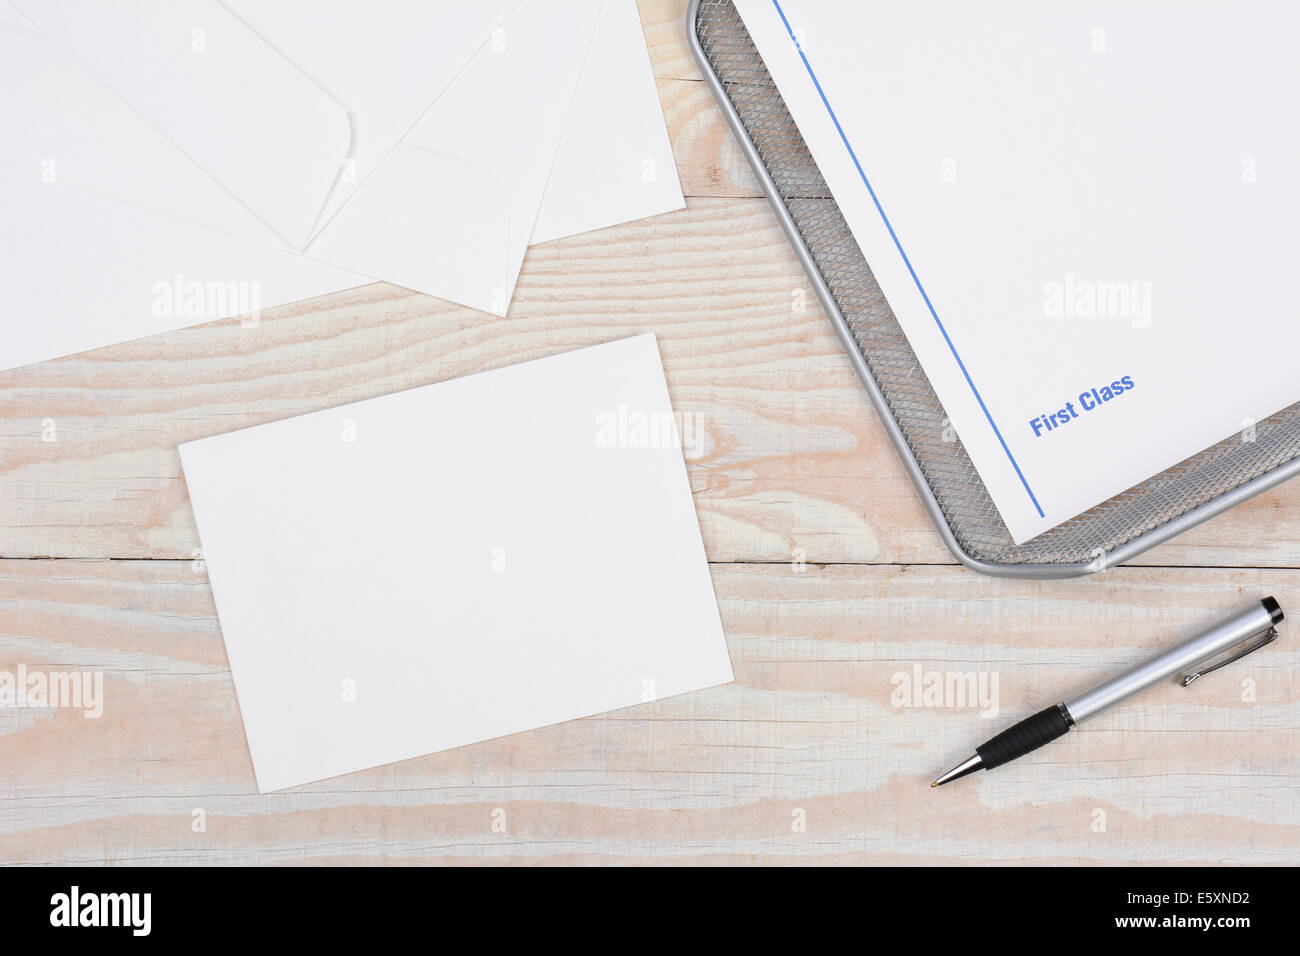 Envelopes and paper for writing letters via snail mail. High angle shot with in-box and pen on a whitewashed desk. Stock Photo